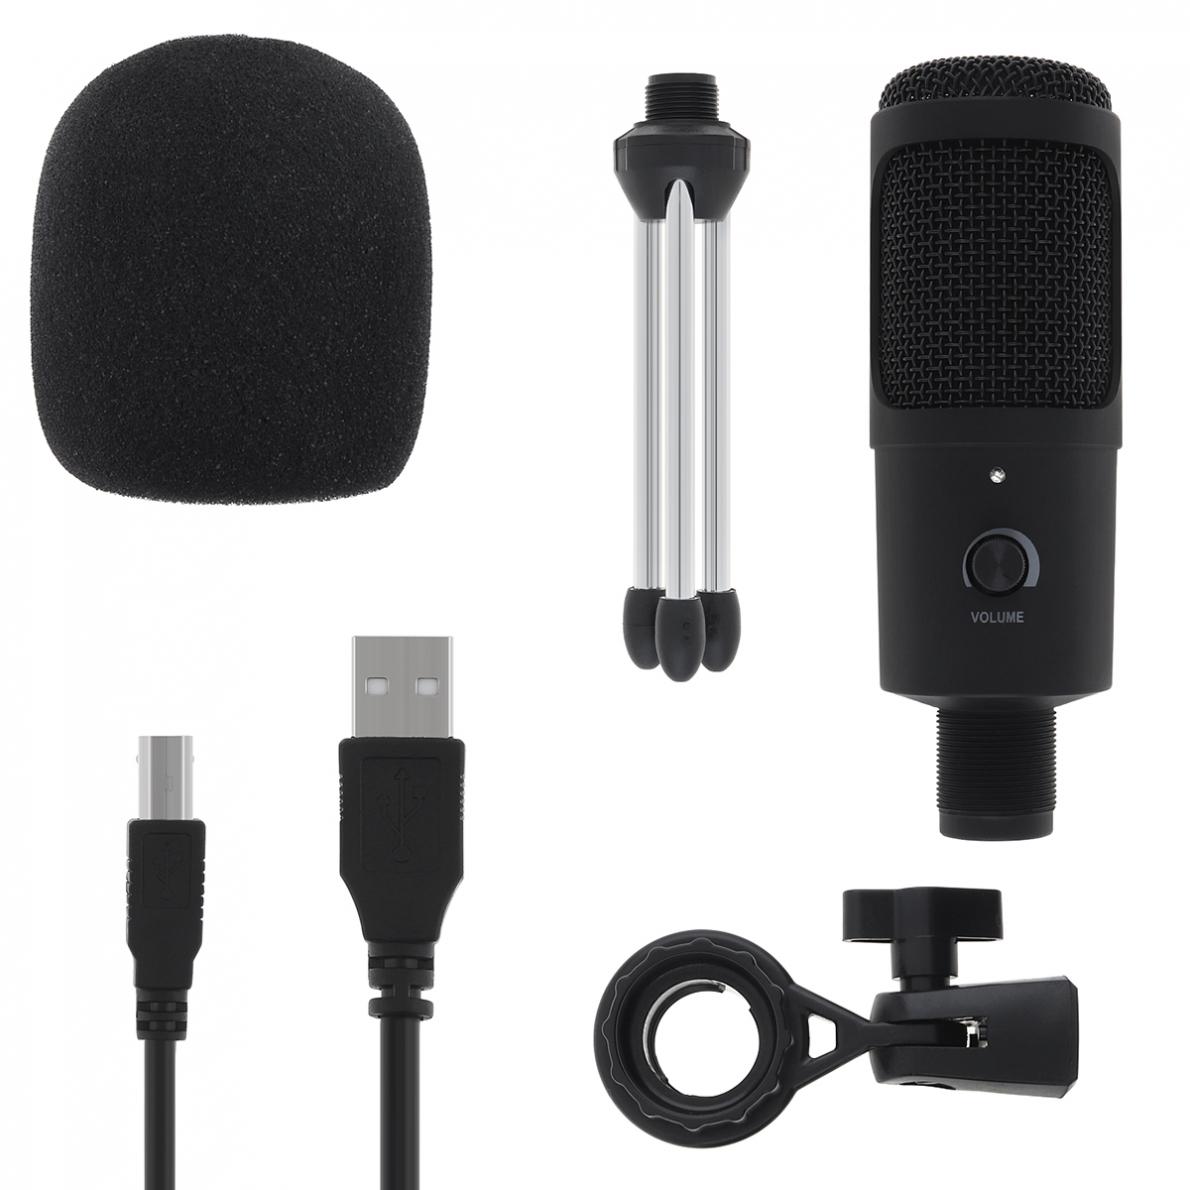 Bakeey-A6-Metal-USB-Condenser-Microphone-Recording-for-Laptop-Computer-Windows-Cardioid-Recording-Vo-1792279-5